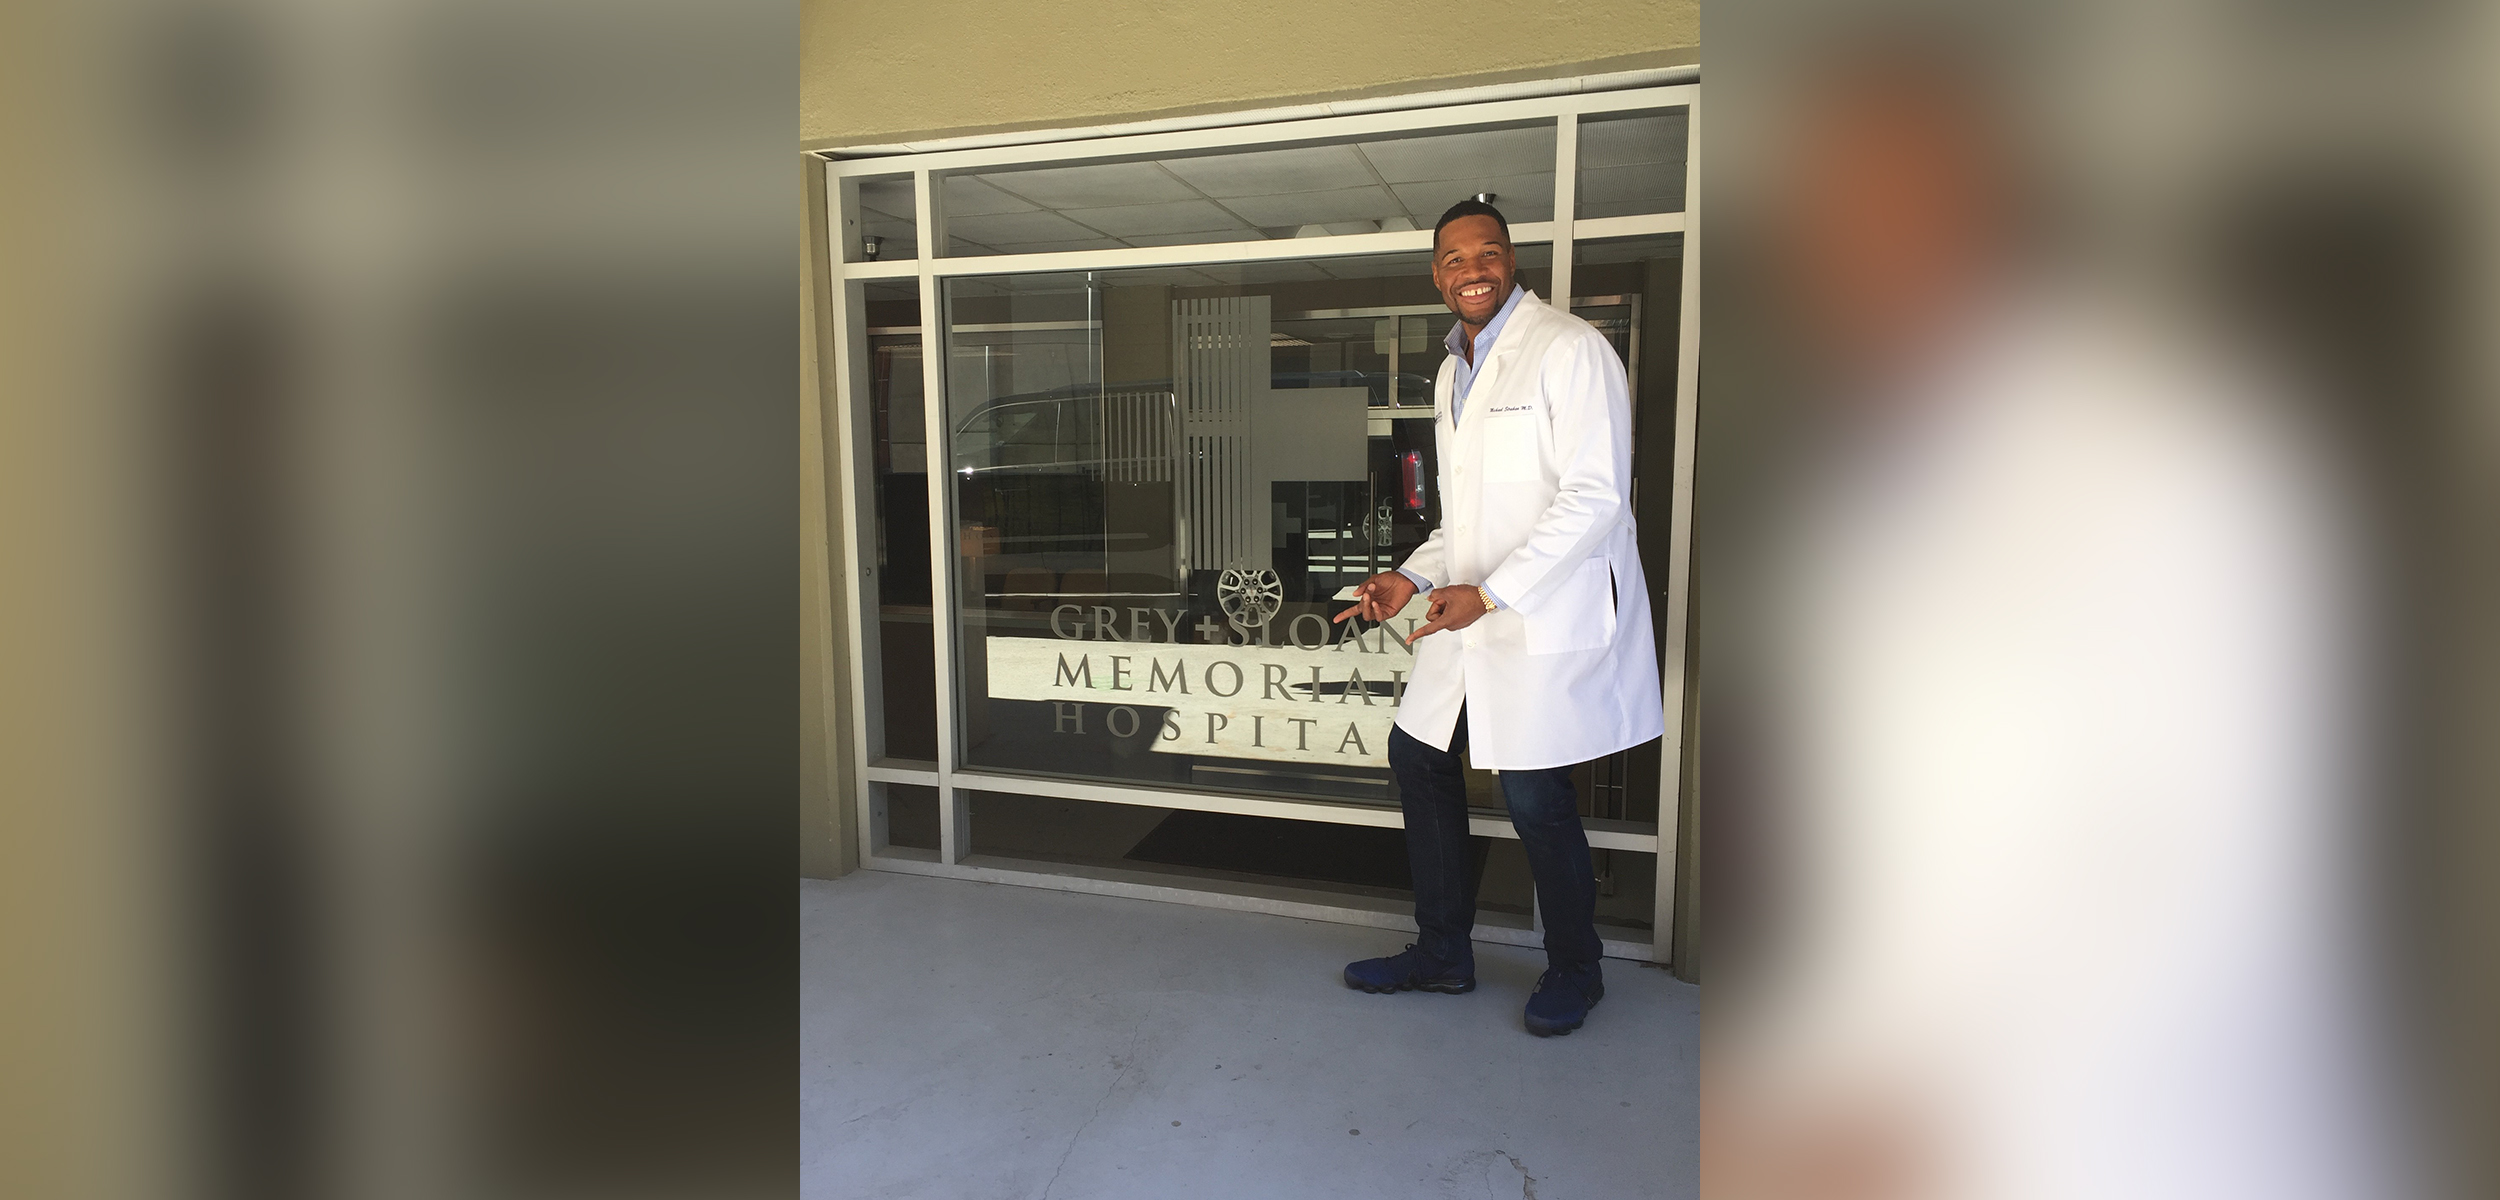 PHOTO:  "Good Morning America" co-anchor Michael Strahan poses on the set of "Grey's Anatomy" in California.